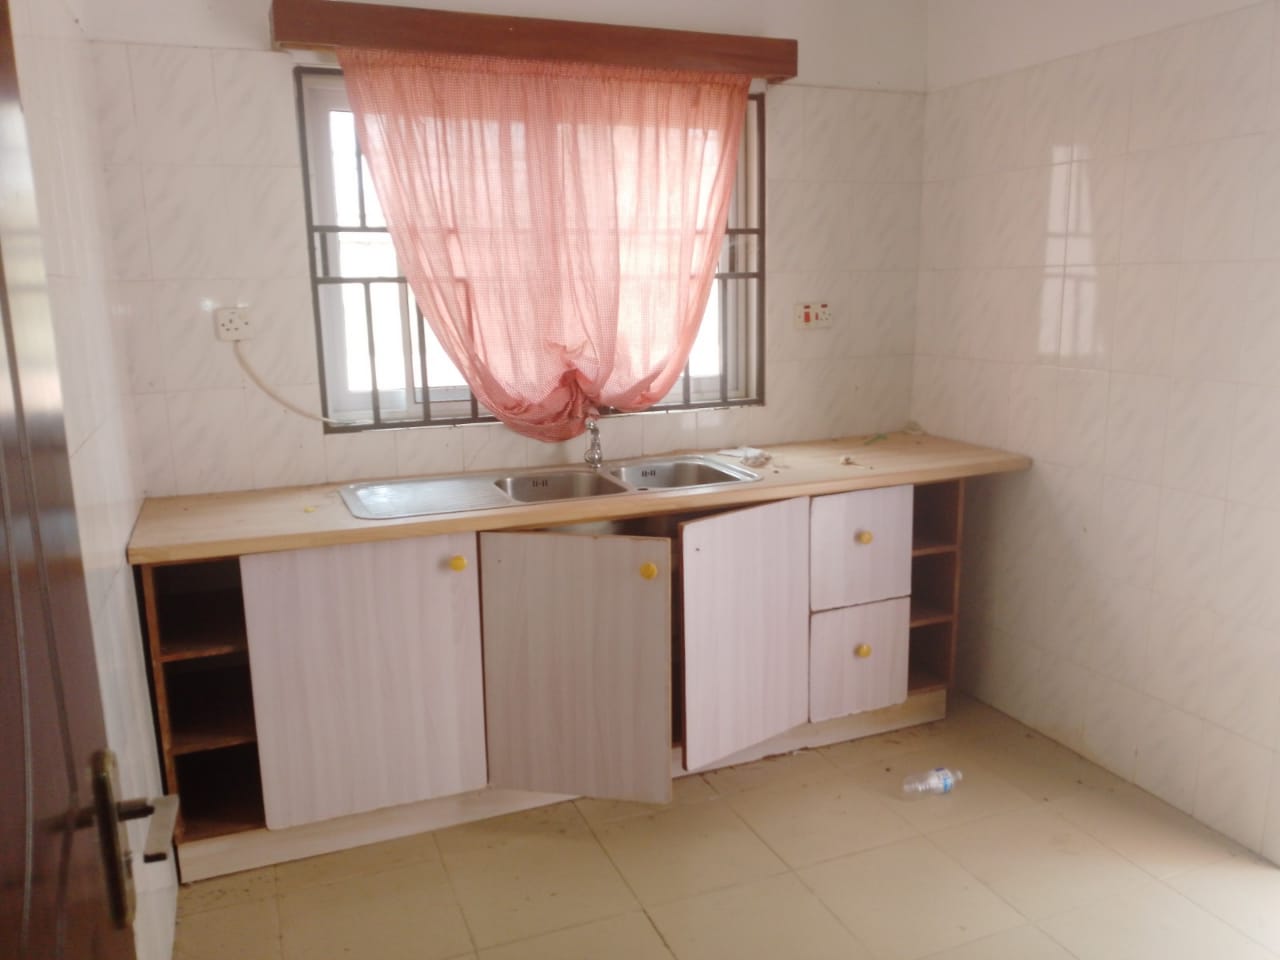 Three 3-Bedroom House for Sale at Kasoa - Toll Booth (Executive)